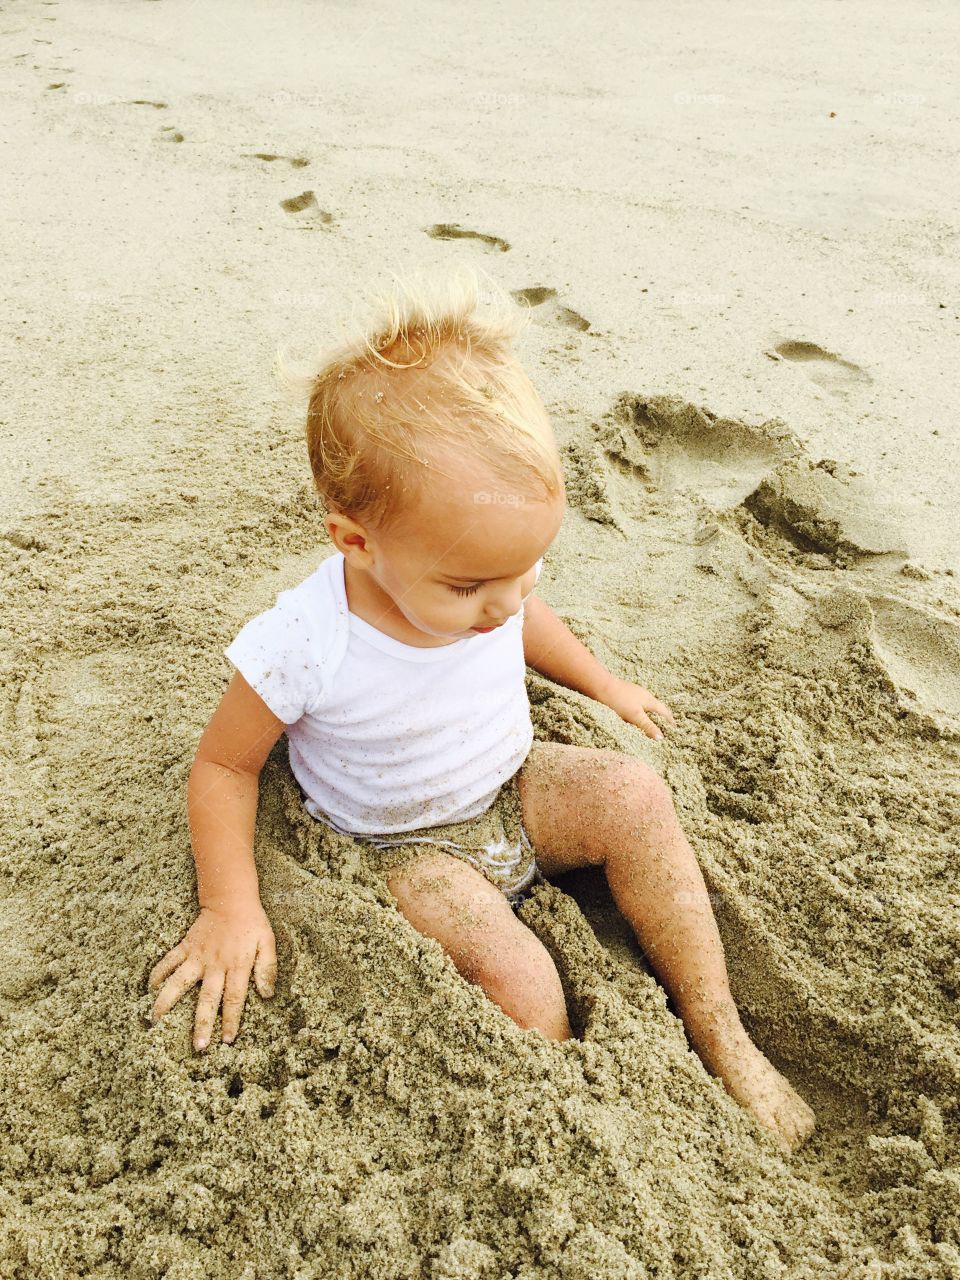 Little boy playing in sand